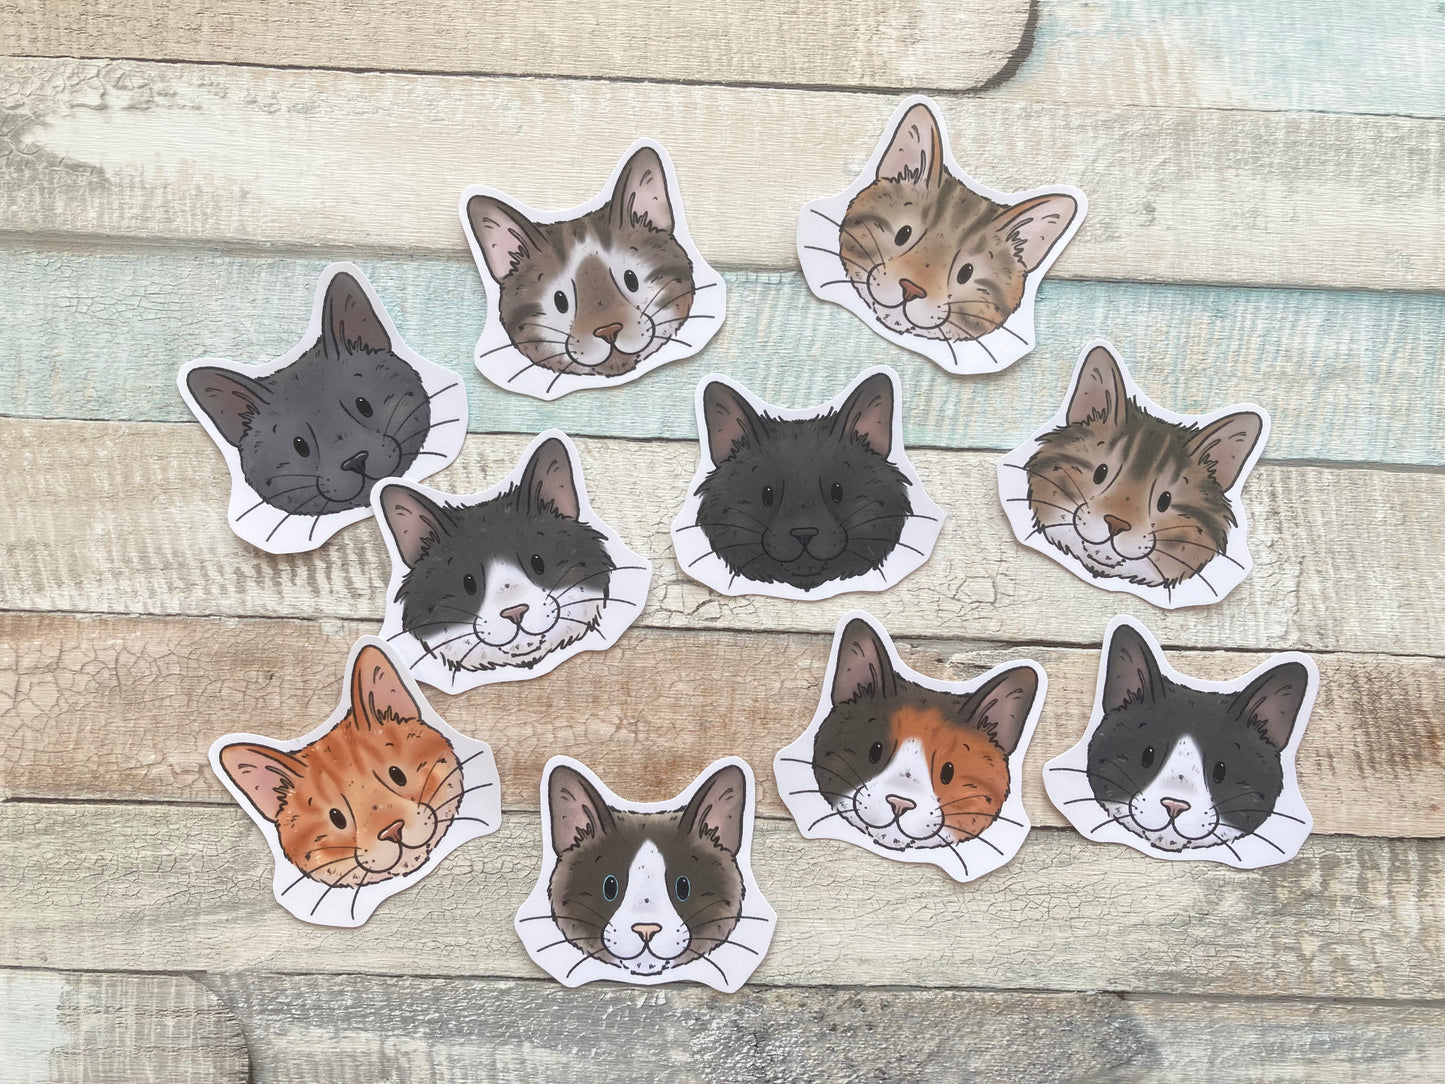 Cat Faces Stickers | Set Of 10 Cat Stickers